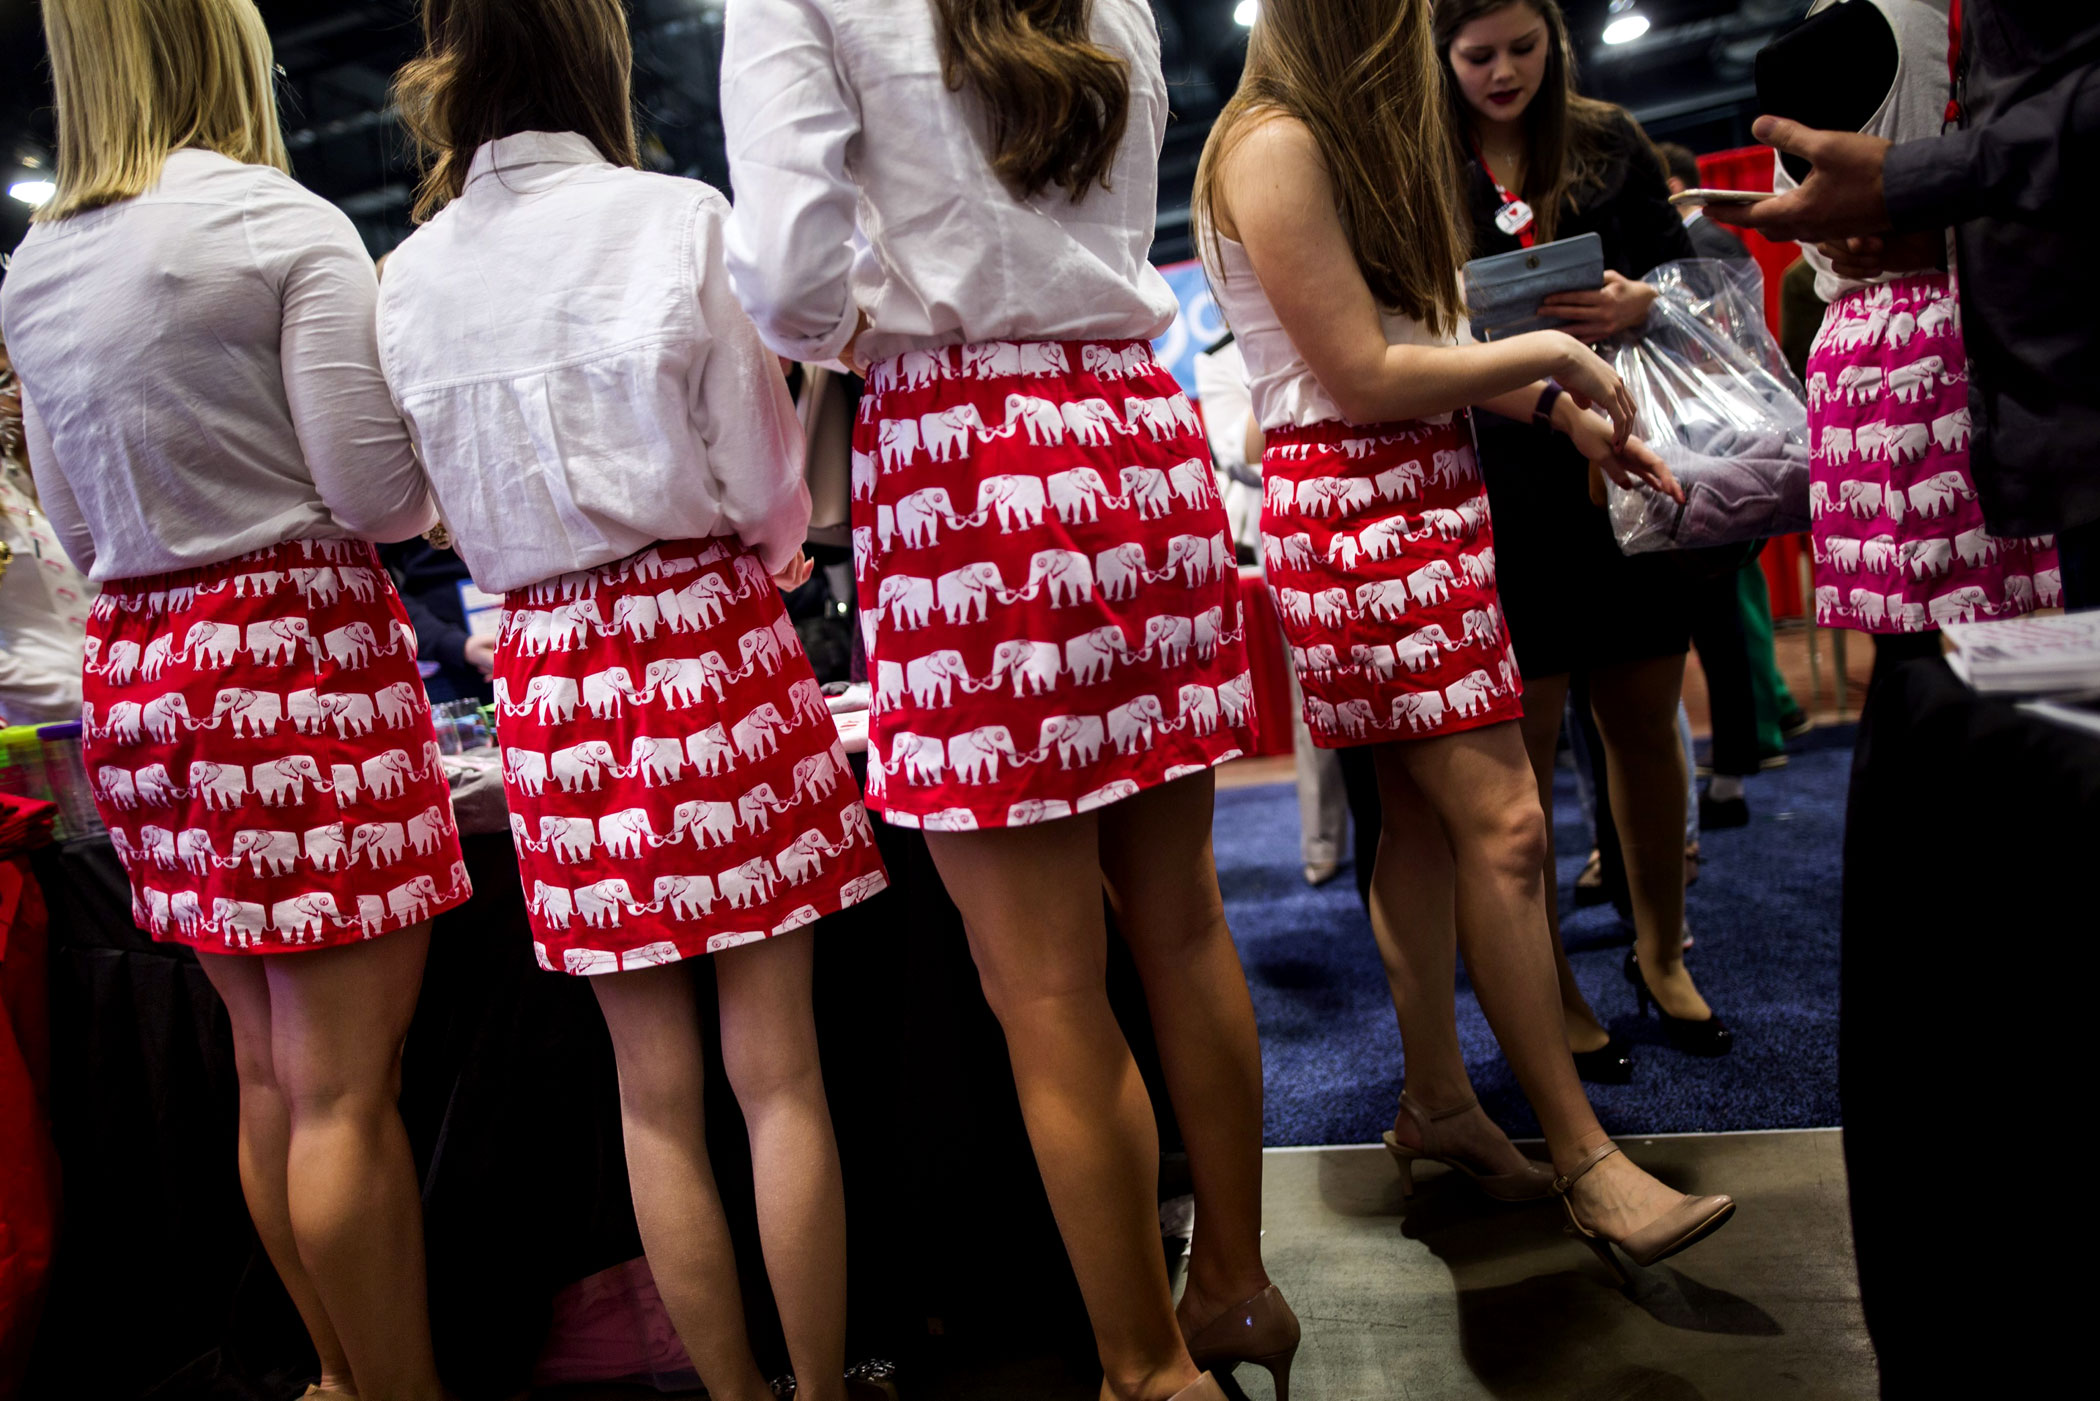 Women with Future Female Leaders wear elephant skirts at their display booth during the Annual Conservative Political Action Conference (CPAC) in National Harbor, Md. on March 5.